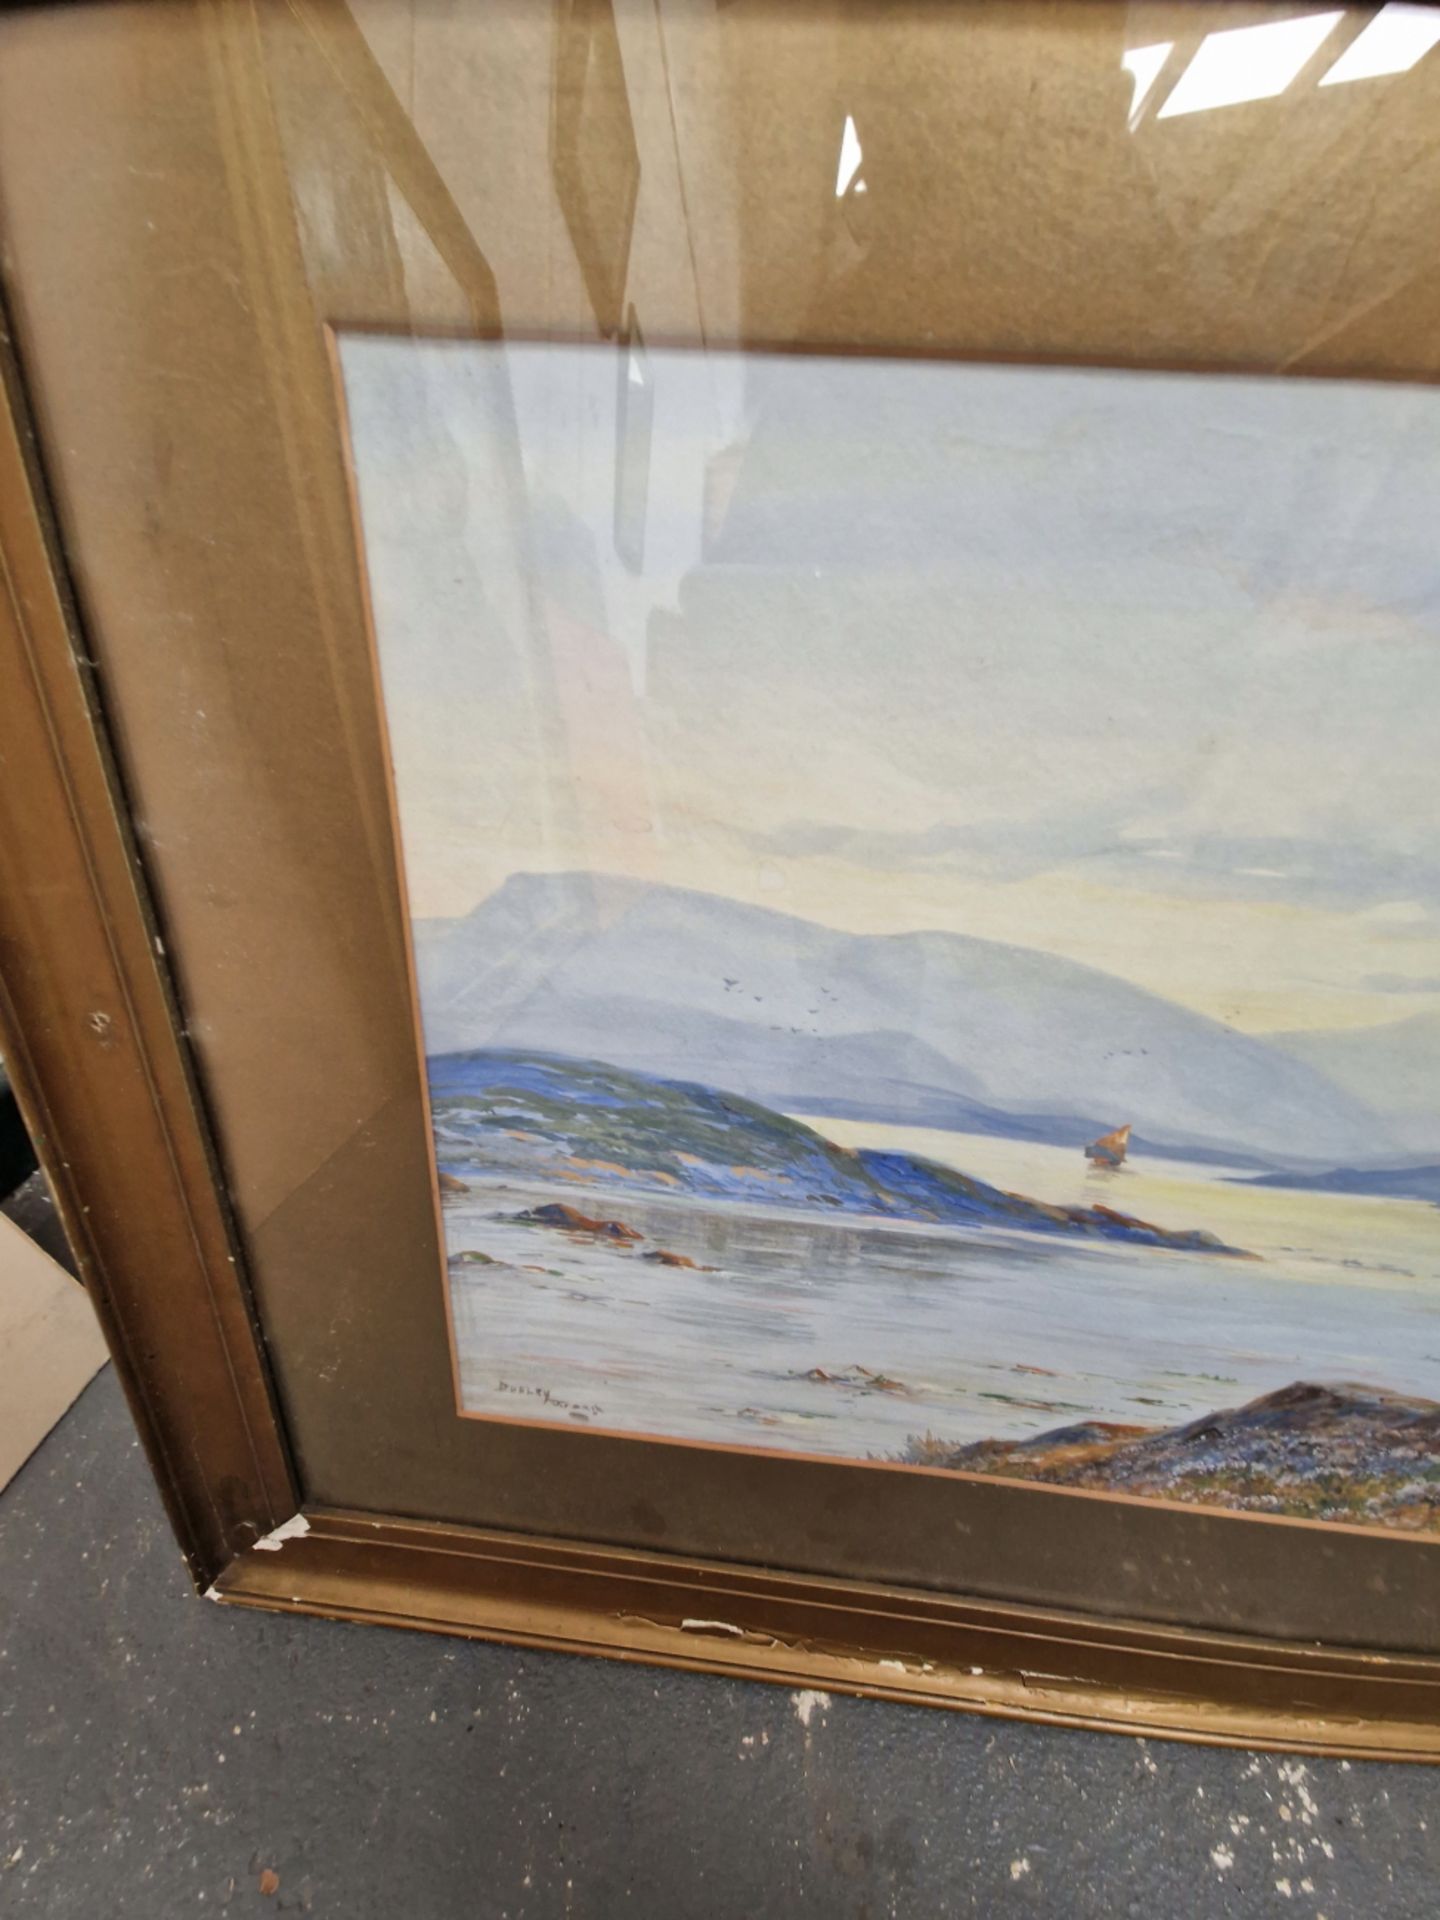 DUDLEY WARD (19th/20th CENTURY ENGLISH SCHOOL) A SCOTTISH LOCH, SIGNED, WATERCOLOUR. 37 x 55cms - Image 4 of 6